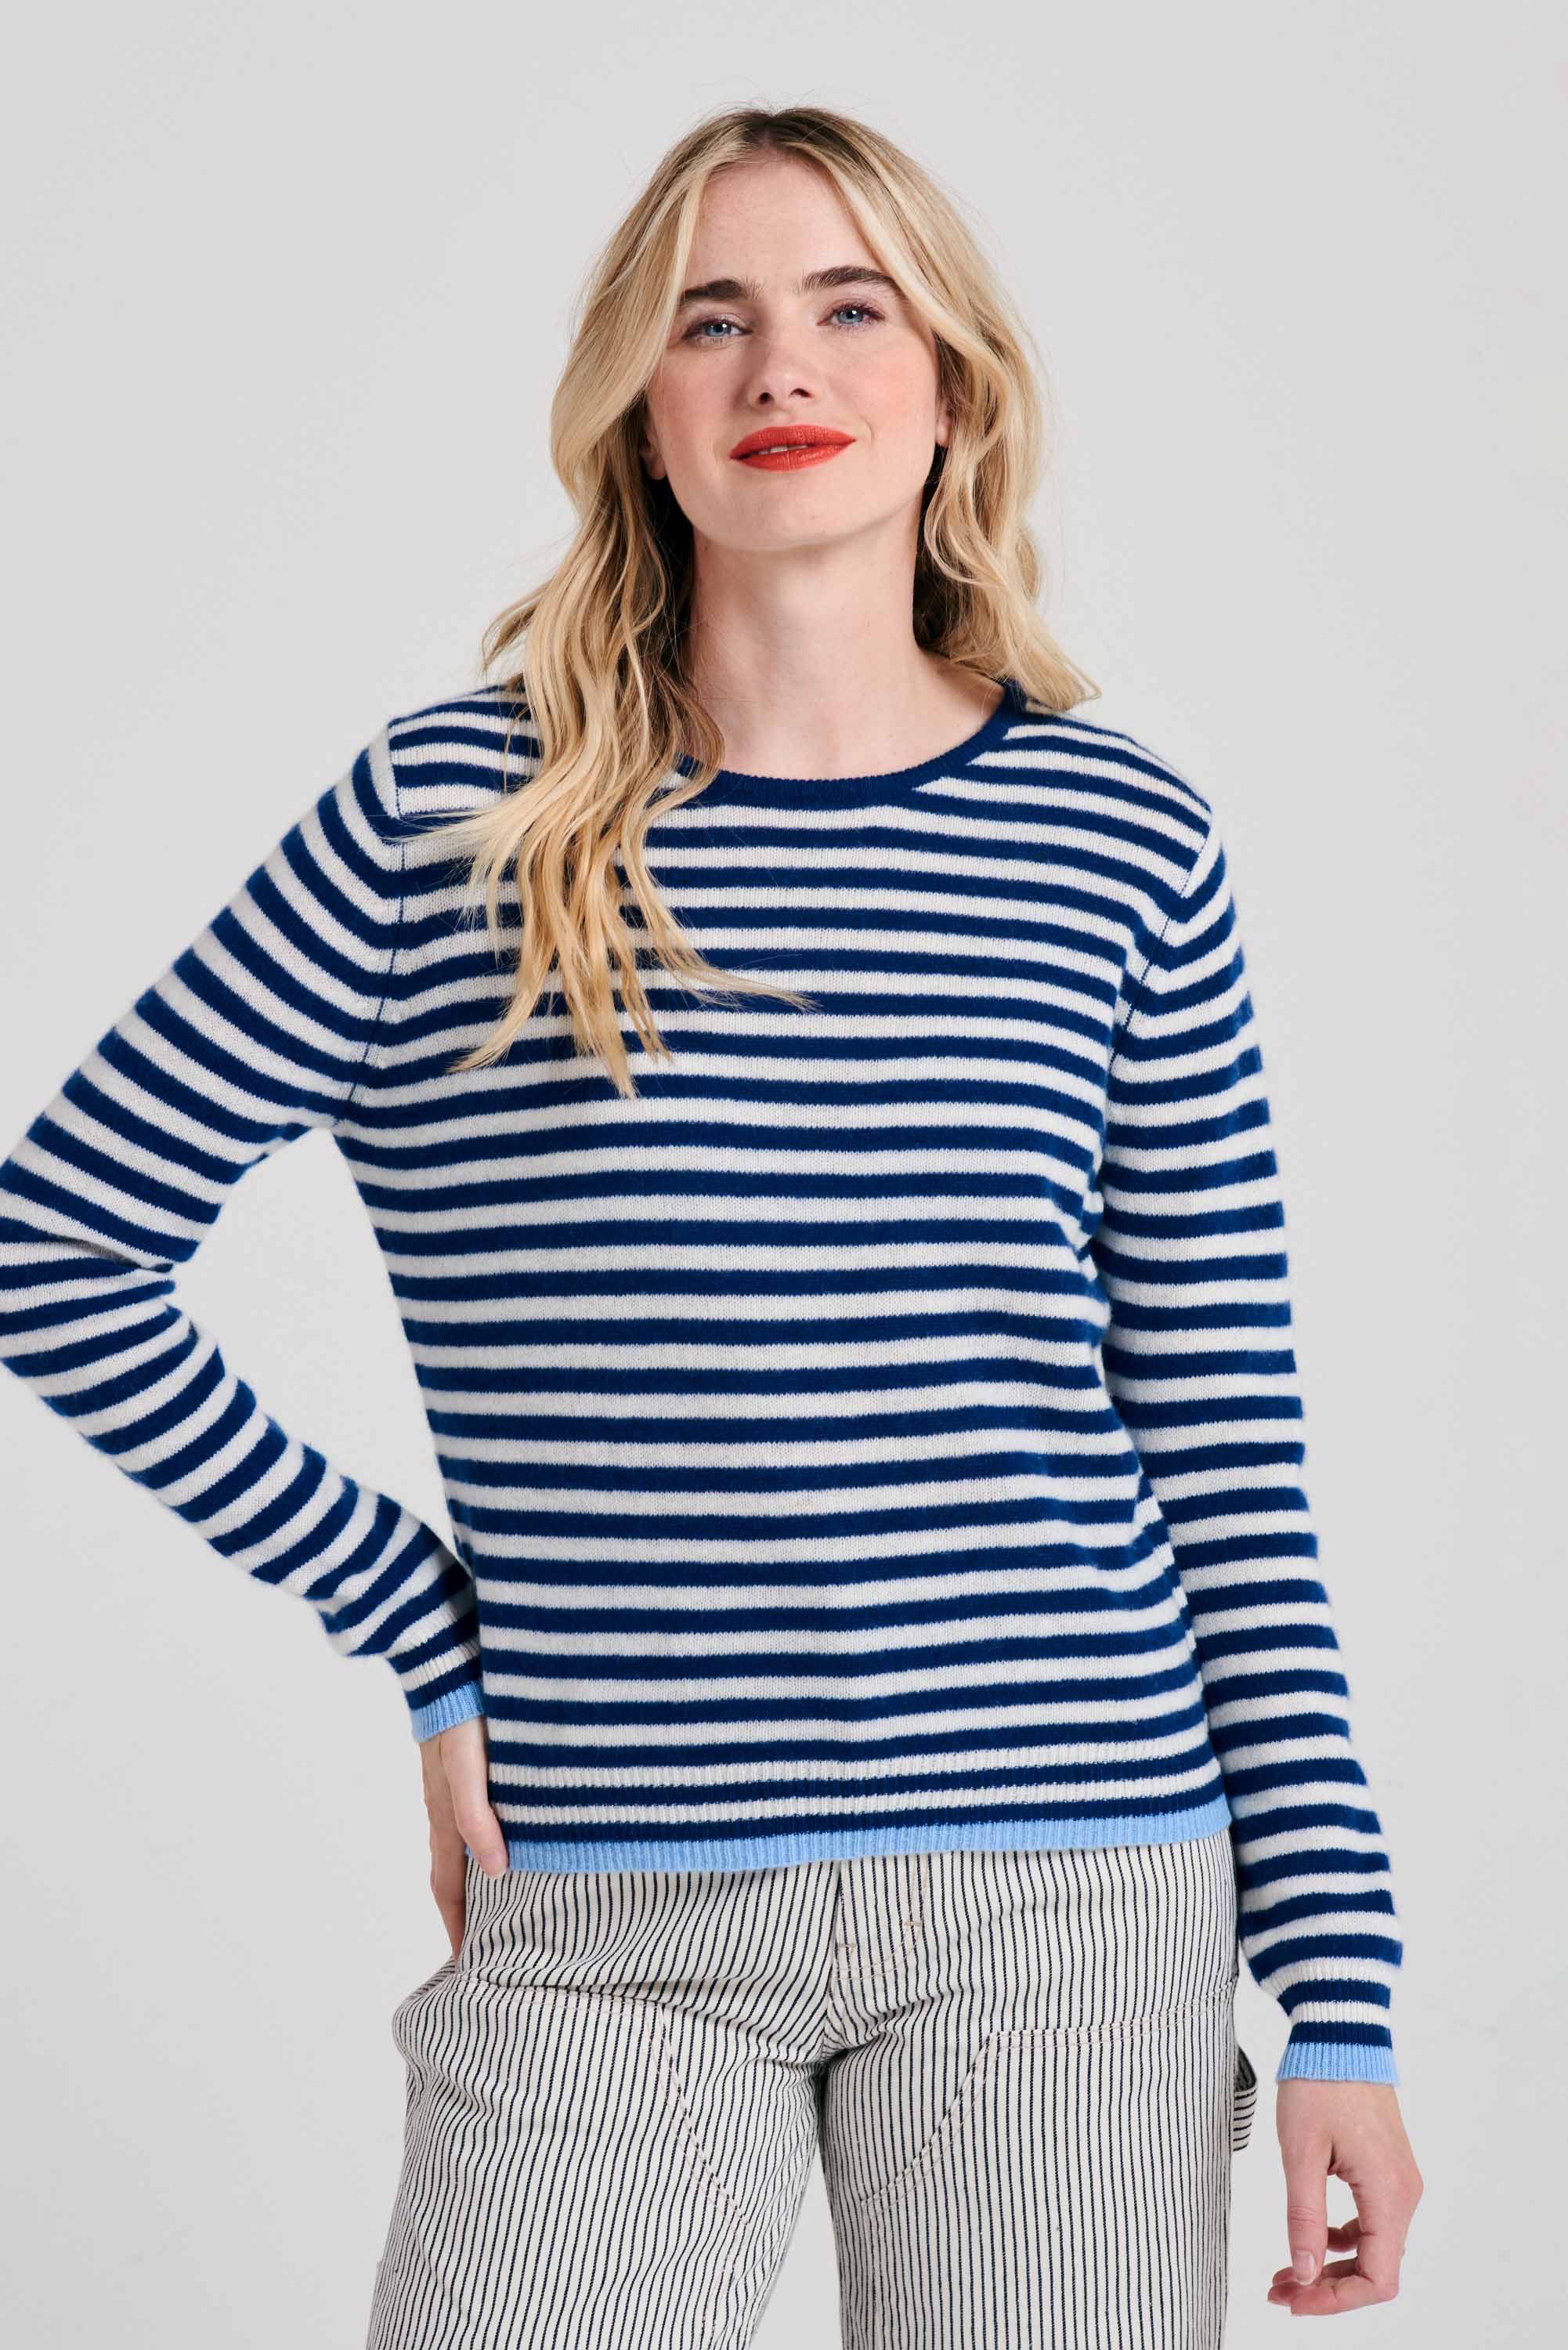 Blonde female model wearing Jumper1234 Little stripe cashmere crew neck jumper in denim and cream, with wedgewood blue tipped ribs